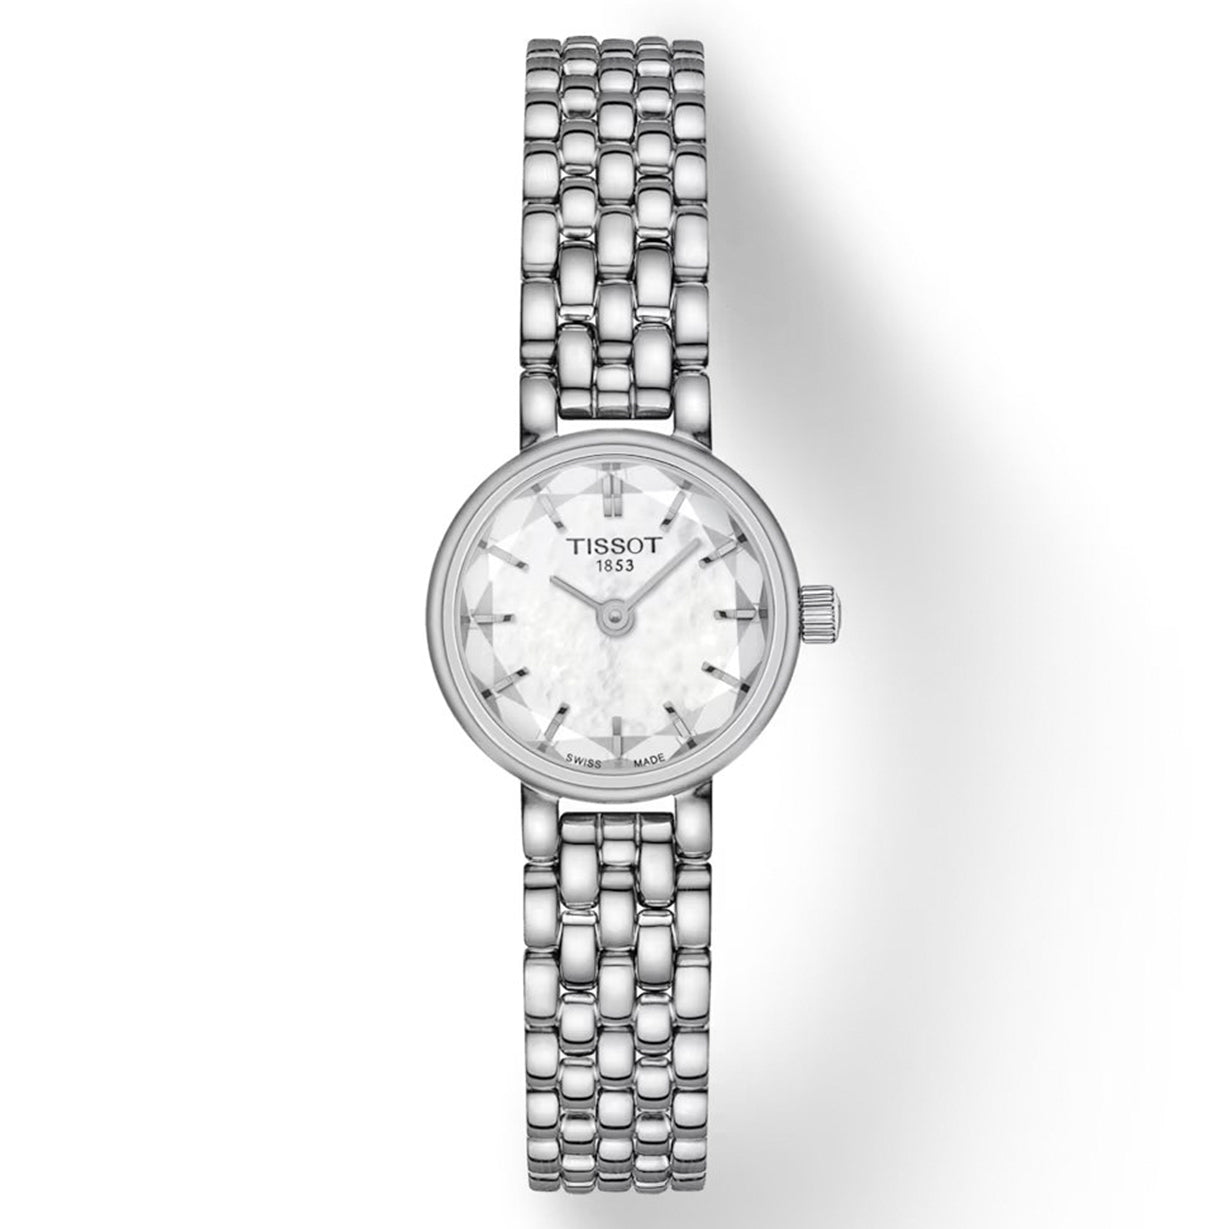 Tissot T-Lady White Mother-Of-Pearl Dial Women 19.5mm